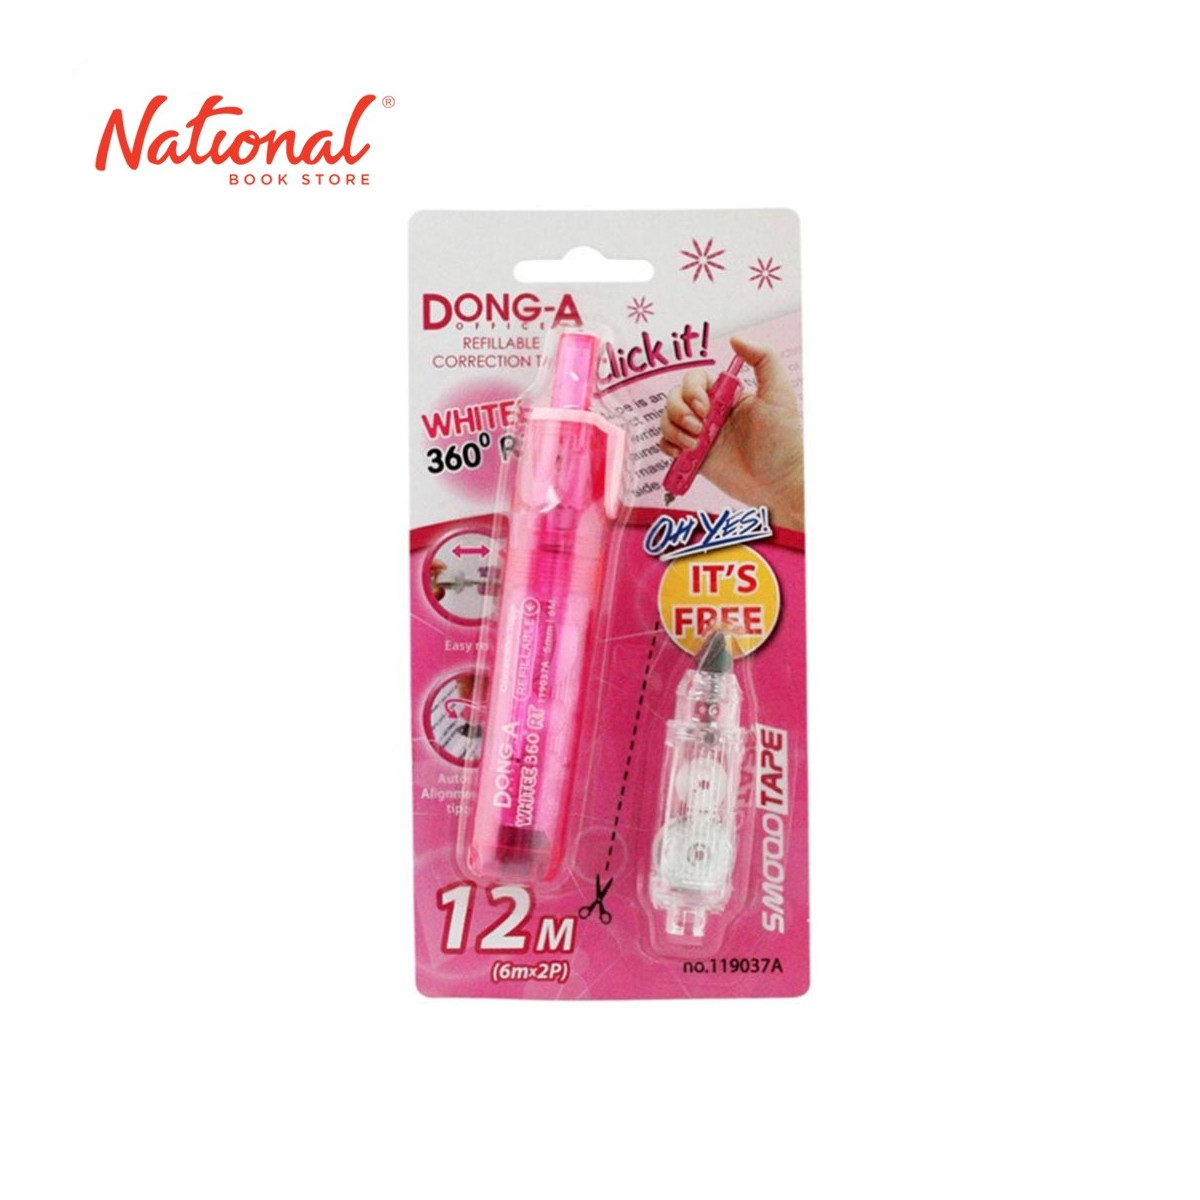 DONG-A REFILLABLE CORRECTION TAPE 119037A 5MMX6M, PINK